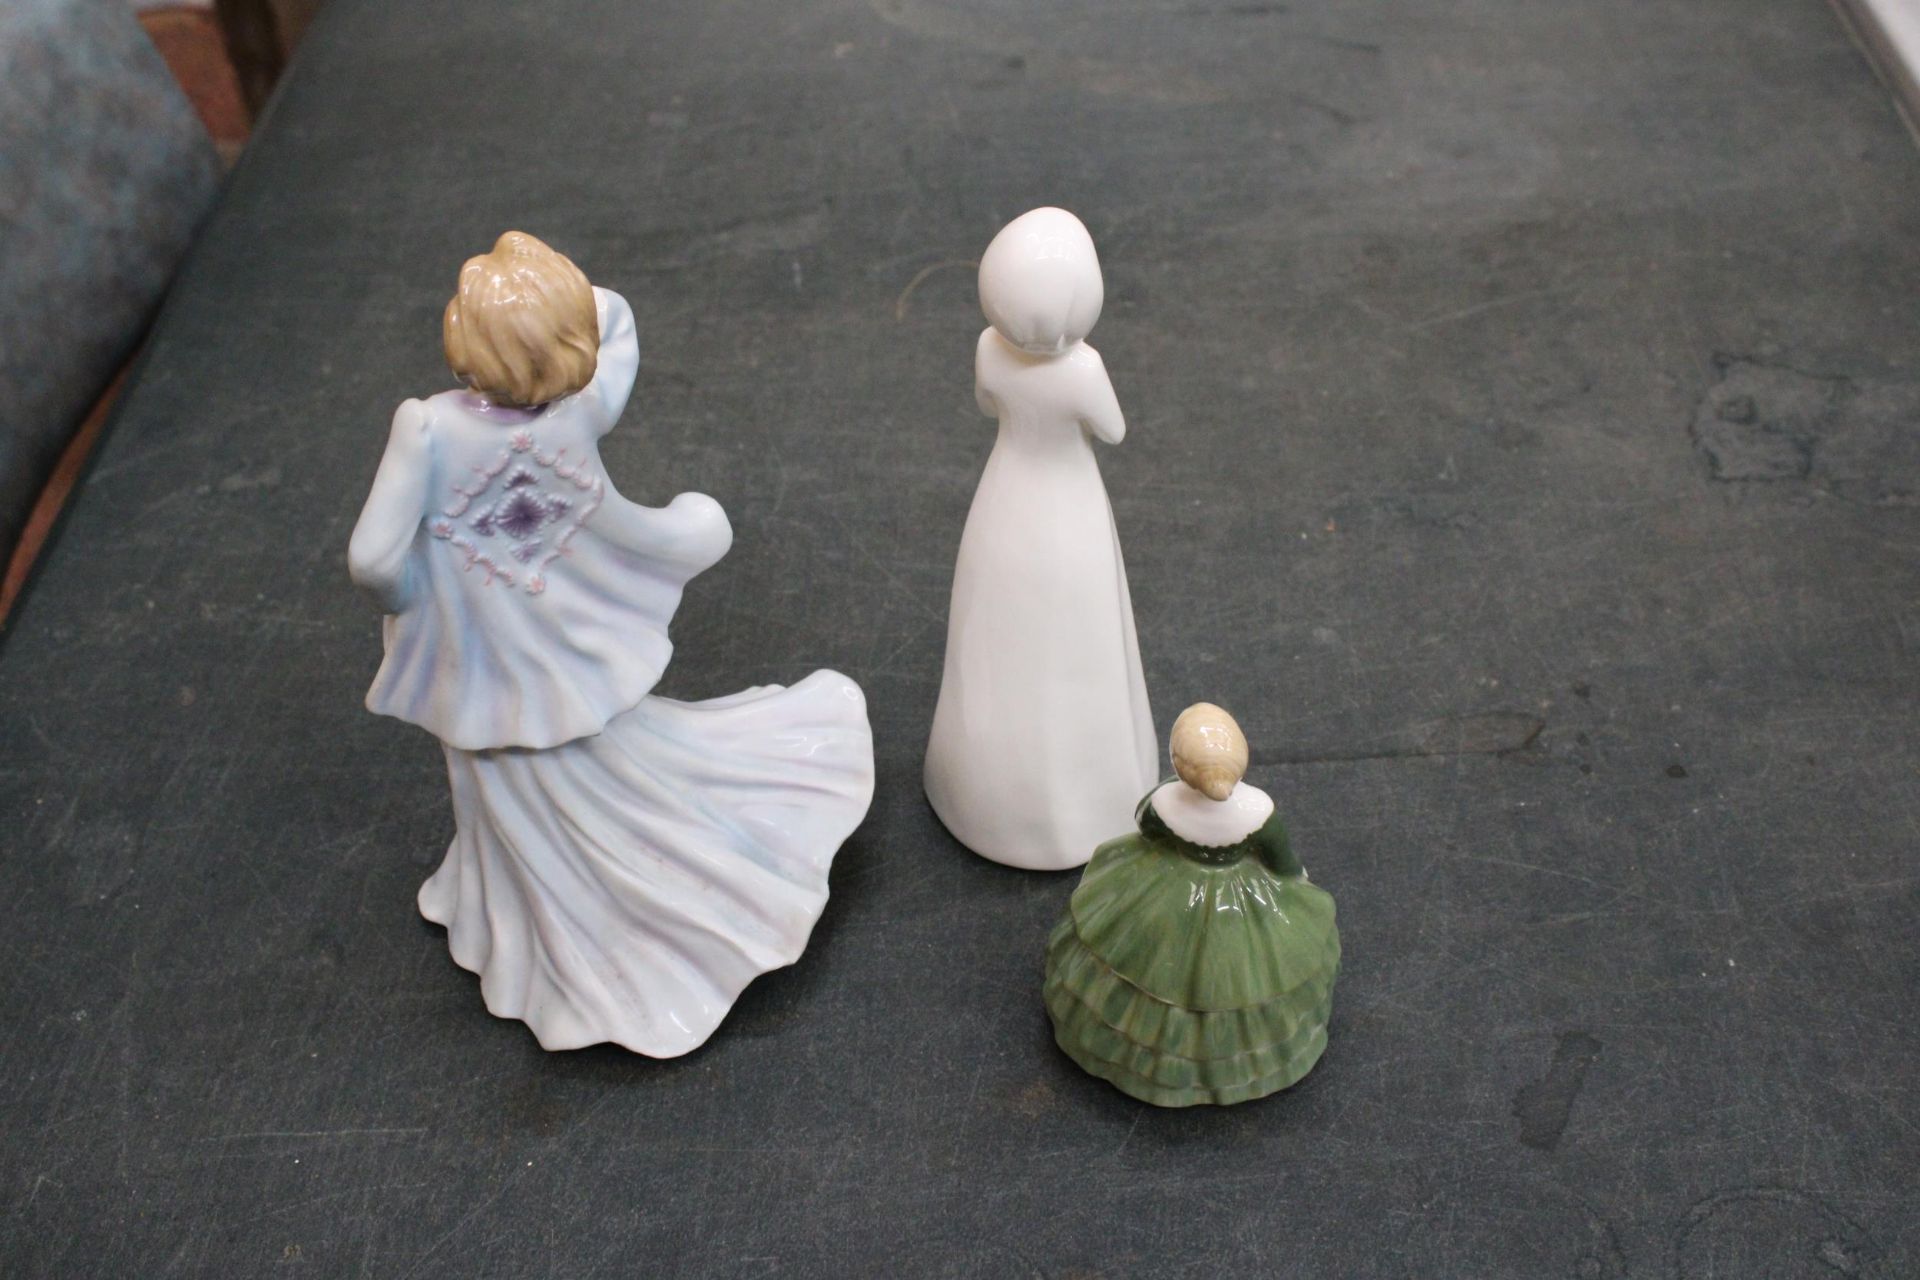 A ROYAL WORCESTER FIGURINE "THOUGHTFUL" TOGETHER WITH A ROYAL DOULTON "IMAGES" FIGURE AND BELLA - Image 2 of 3